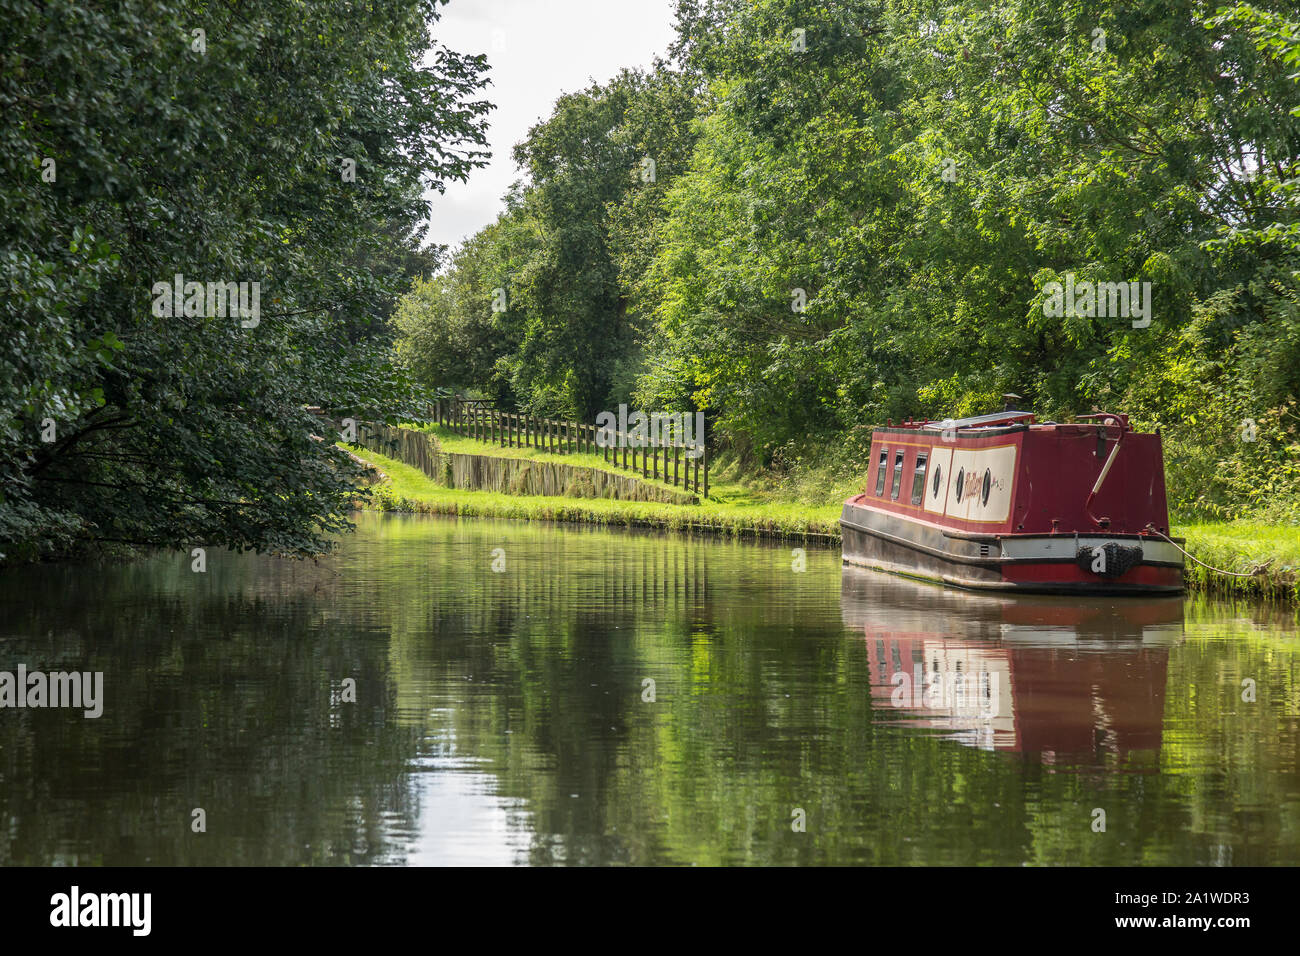 A Narrow Boat, or Barge, moored up on The Shropshire Union Canal in England. Stock Photo